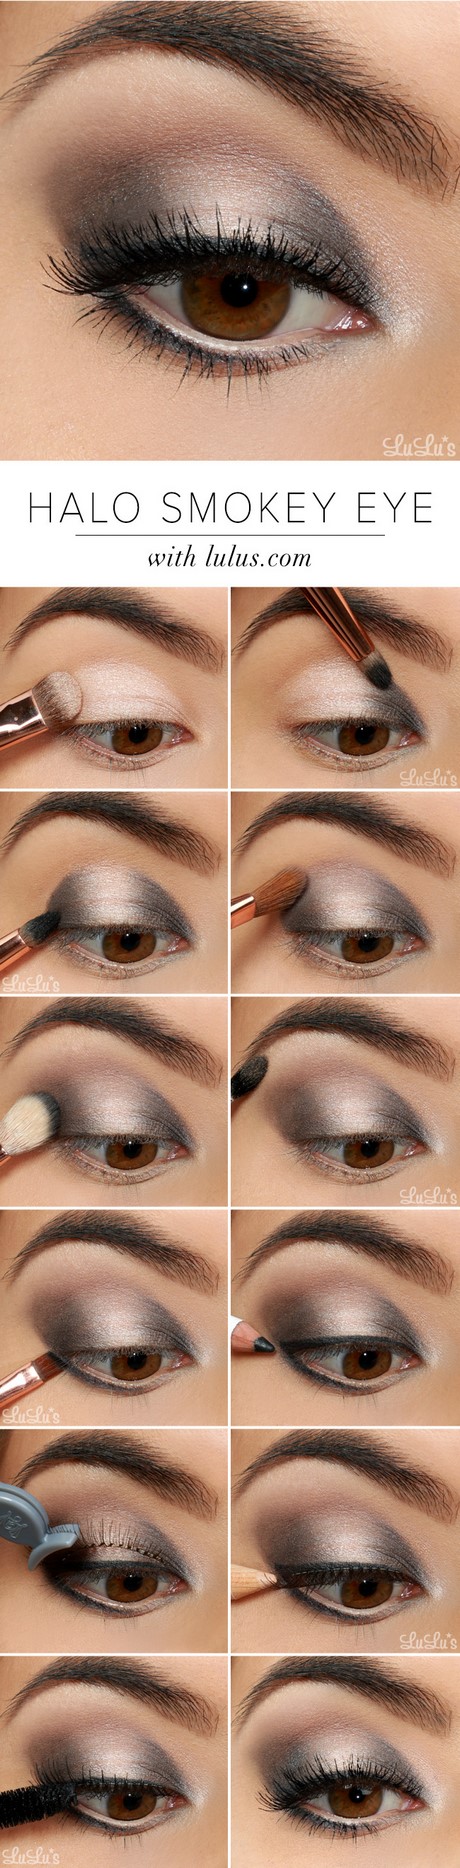 date-night-gold-and-browns-makeup-tutorial-64 Datum nacht goud en browns make-up tutorial